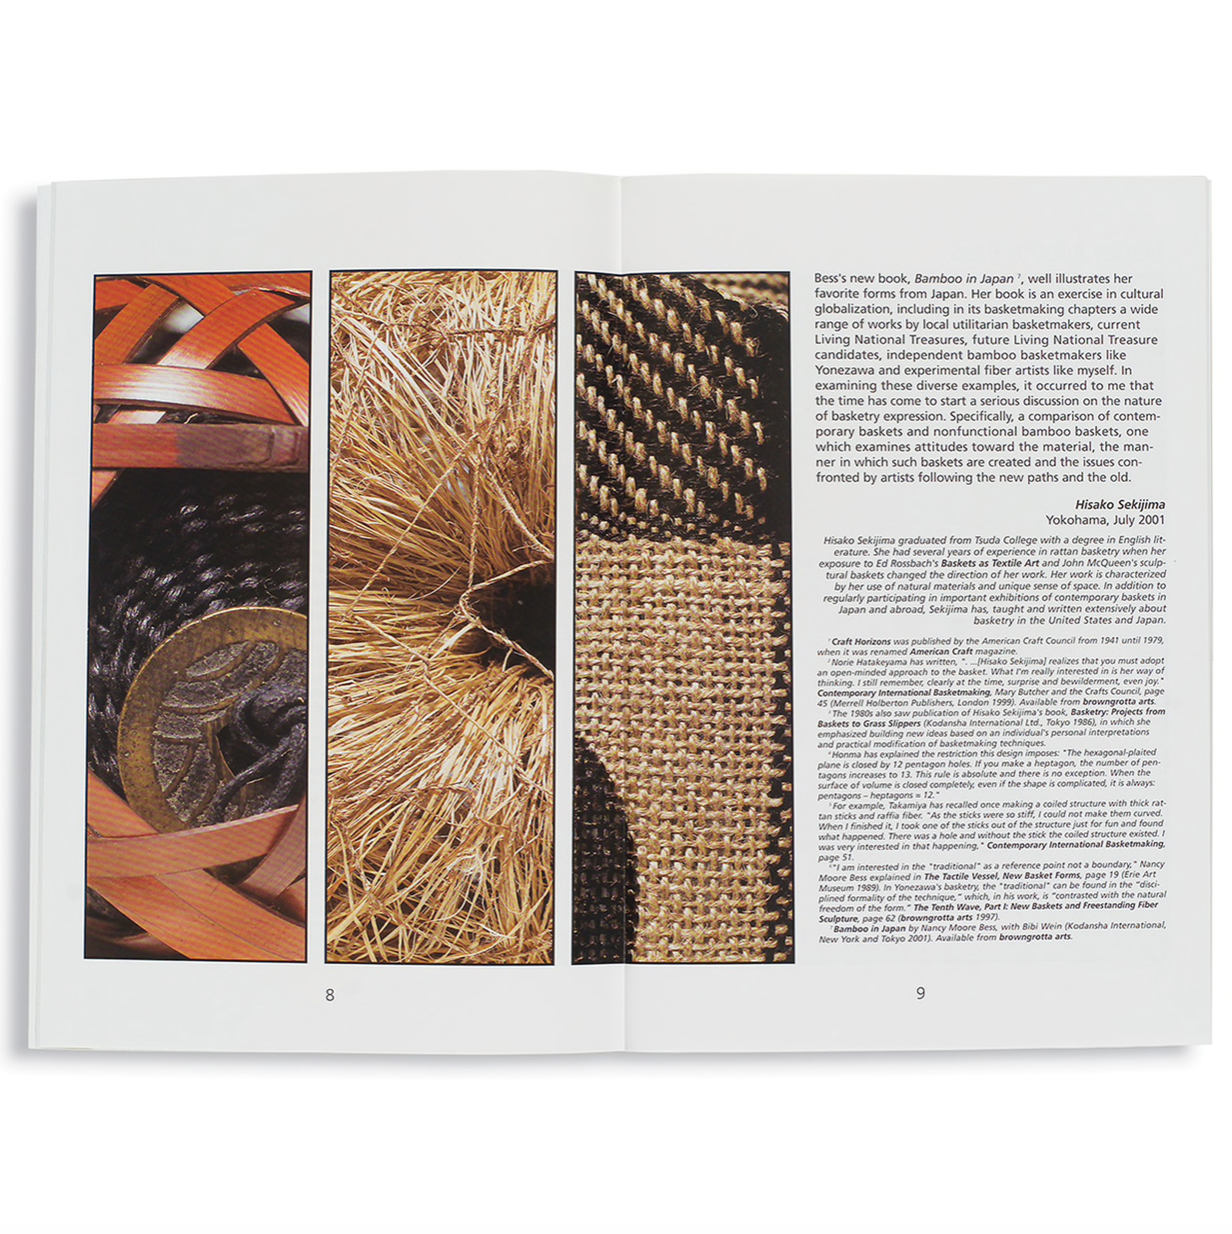 Japan Under The Influence: Innovative basketmakers deconstruct Japanese tradition